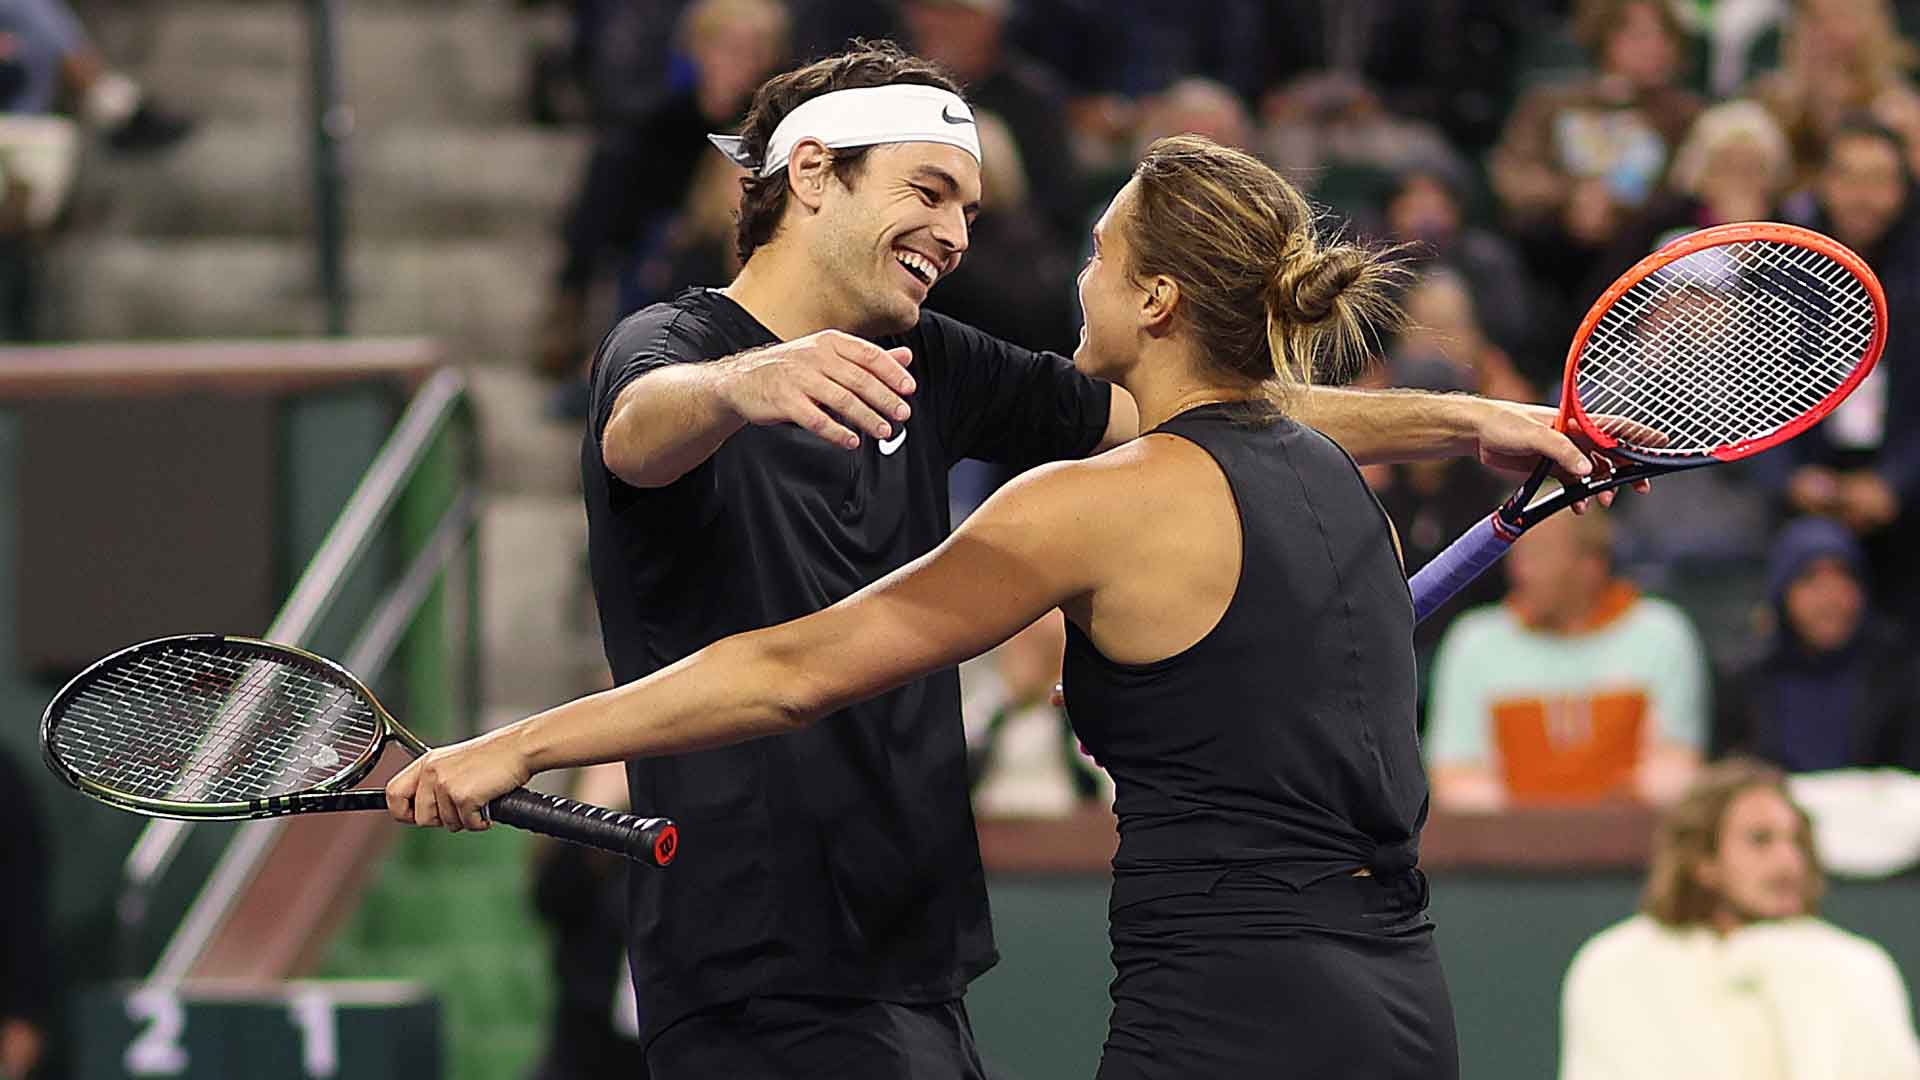 ATP, WTA Stars Unite For Mixed Doubles Exhibition At Indian Wells ATP Tour Tennis